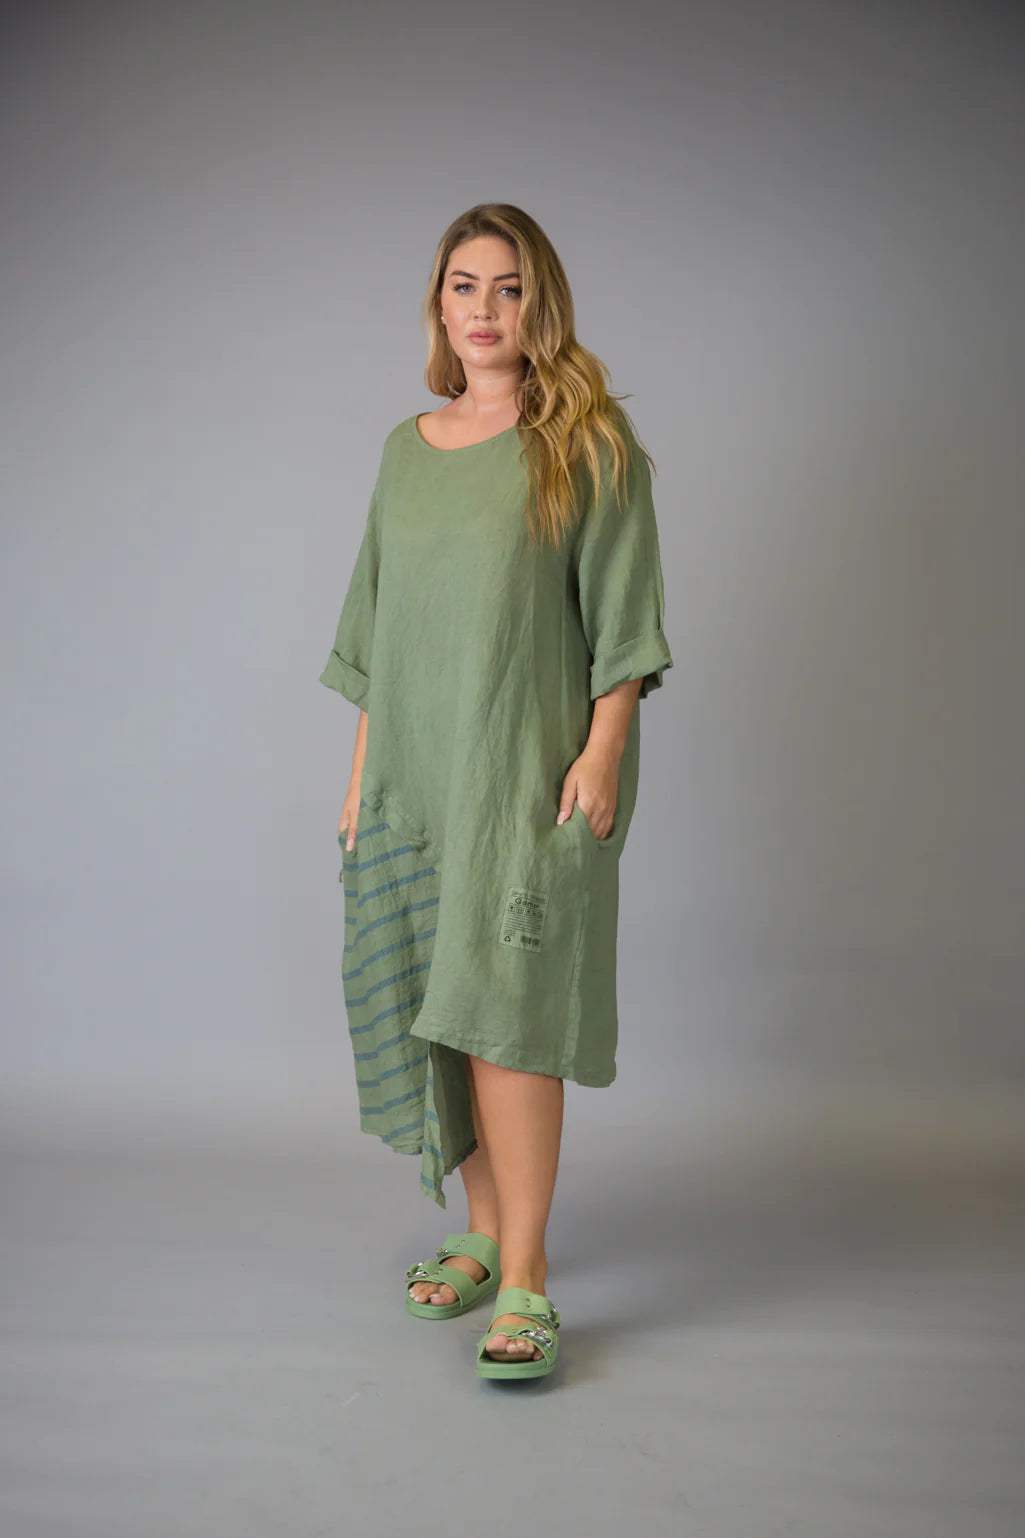 Paolo Tricot Sale, D11407 Striped Linen Dress 50% Off Regular Price